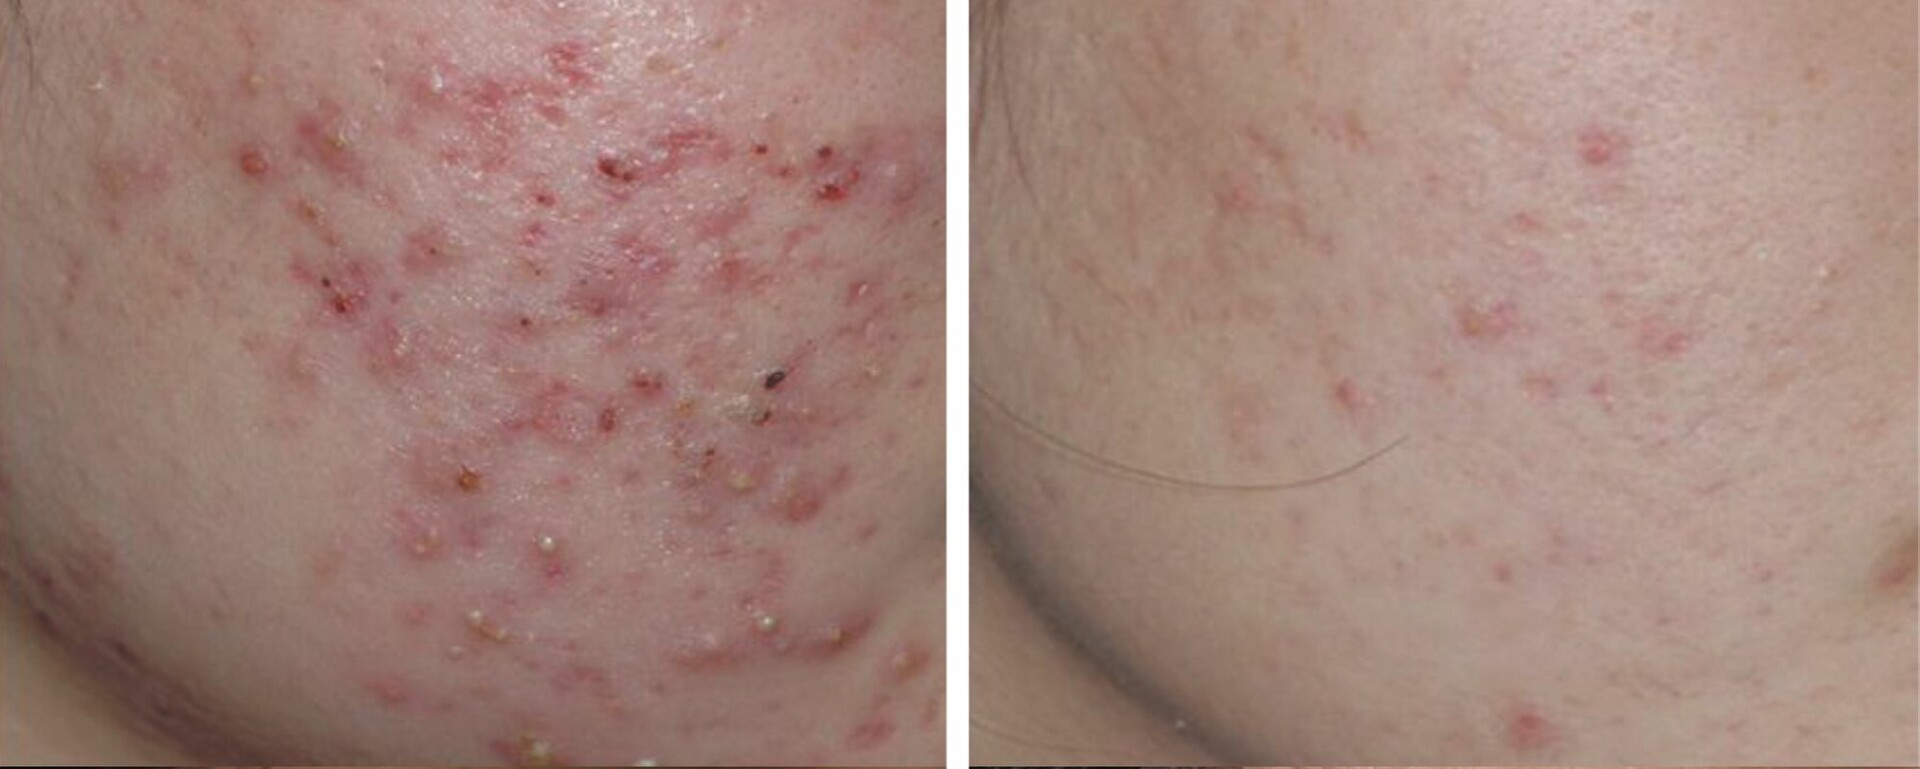 Getting Rid of Acne Scarring: What Are Your Options?